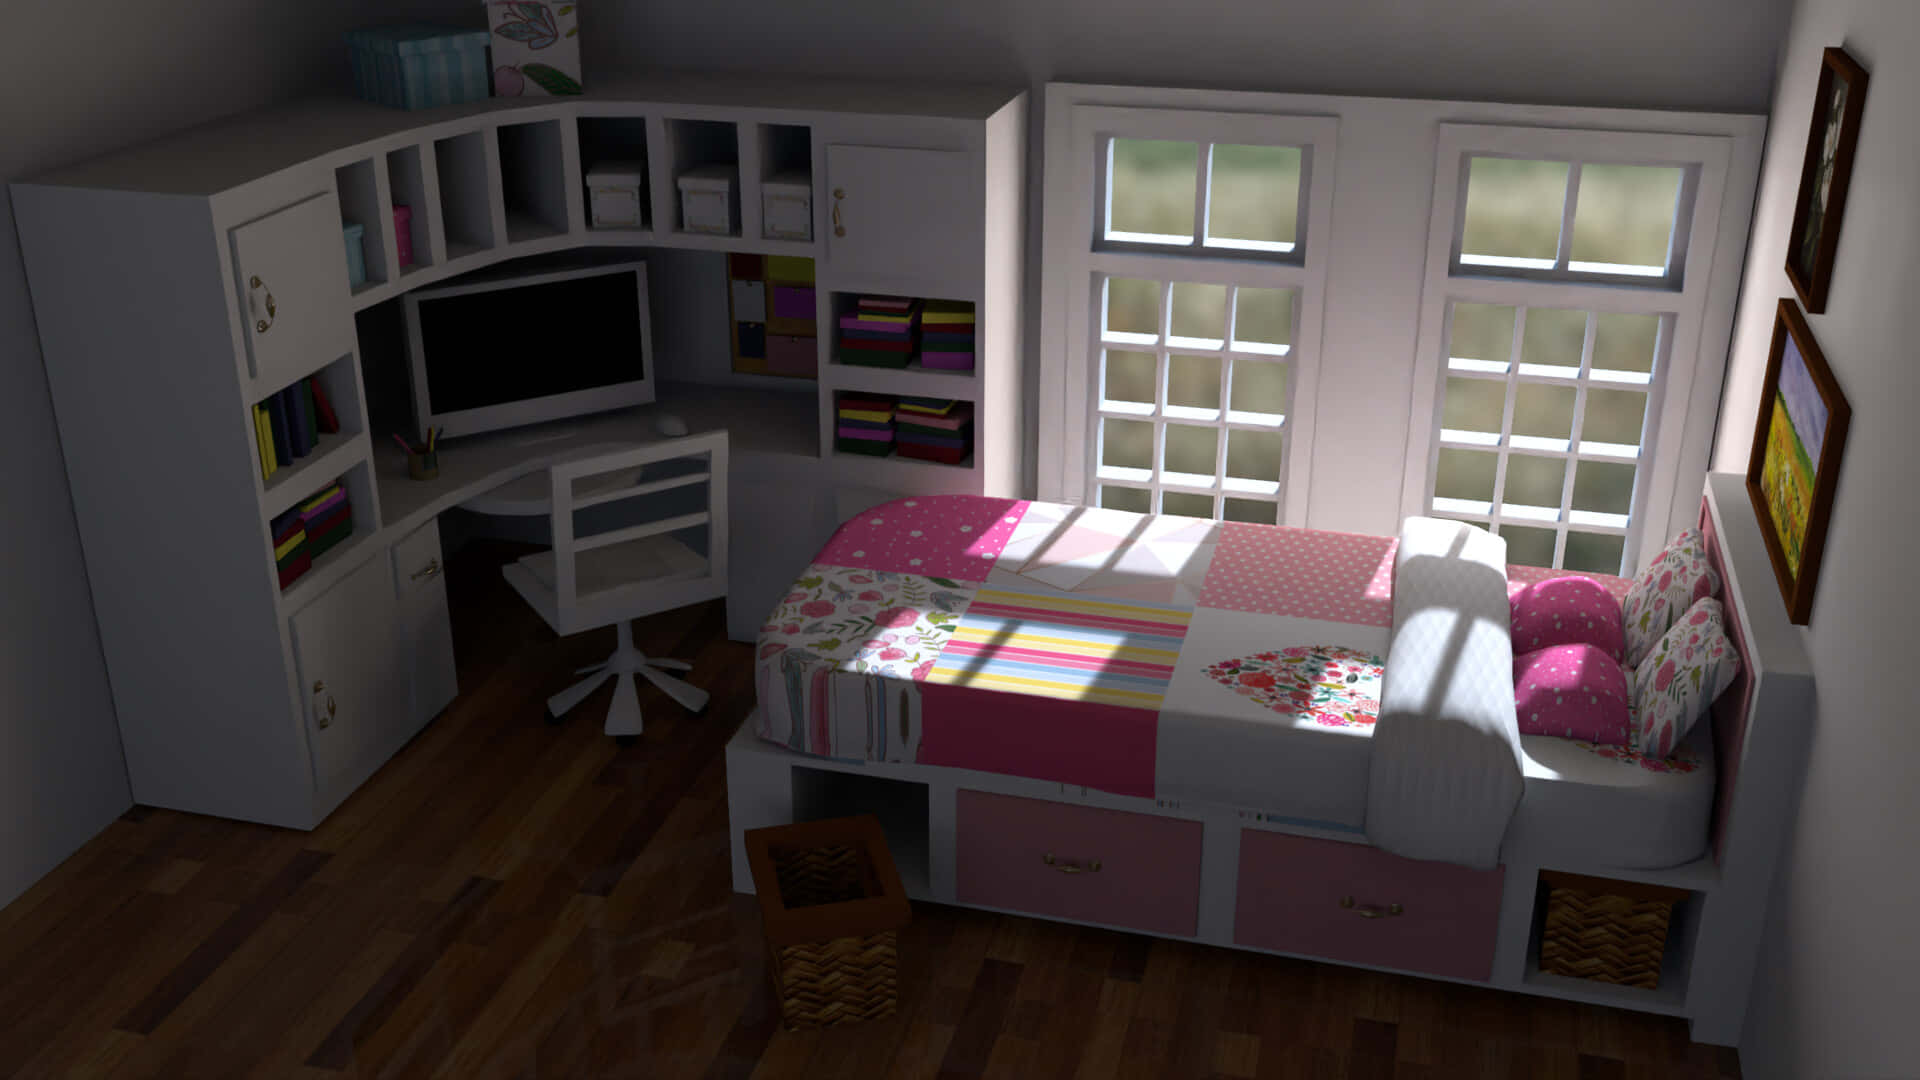 Page 3  Anime Bedroom Images  Free Download on Freepik